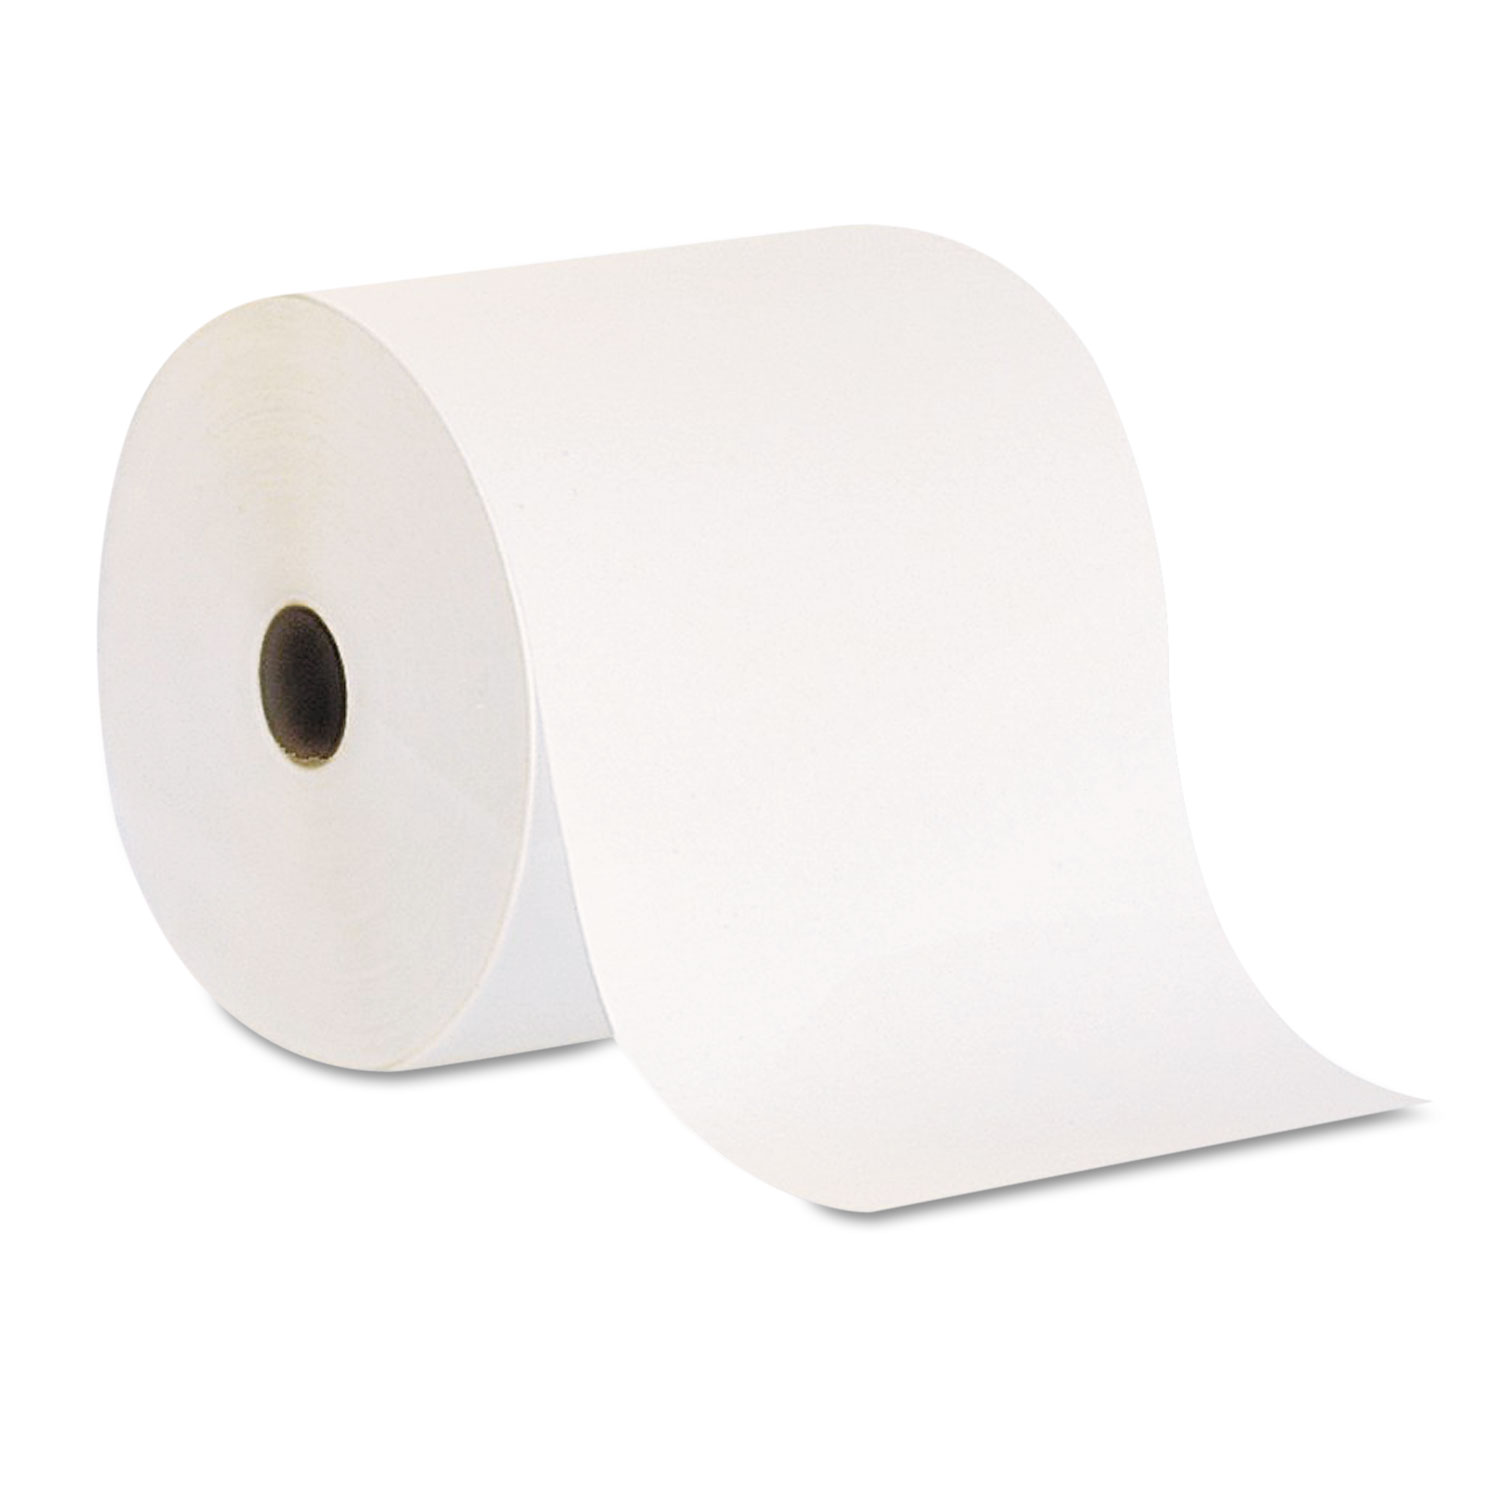 Nonperforated Paper Towel Rolls, 7 7/8 x 800ft, White, 6 Rolls/Carton